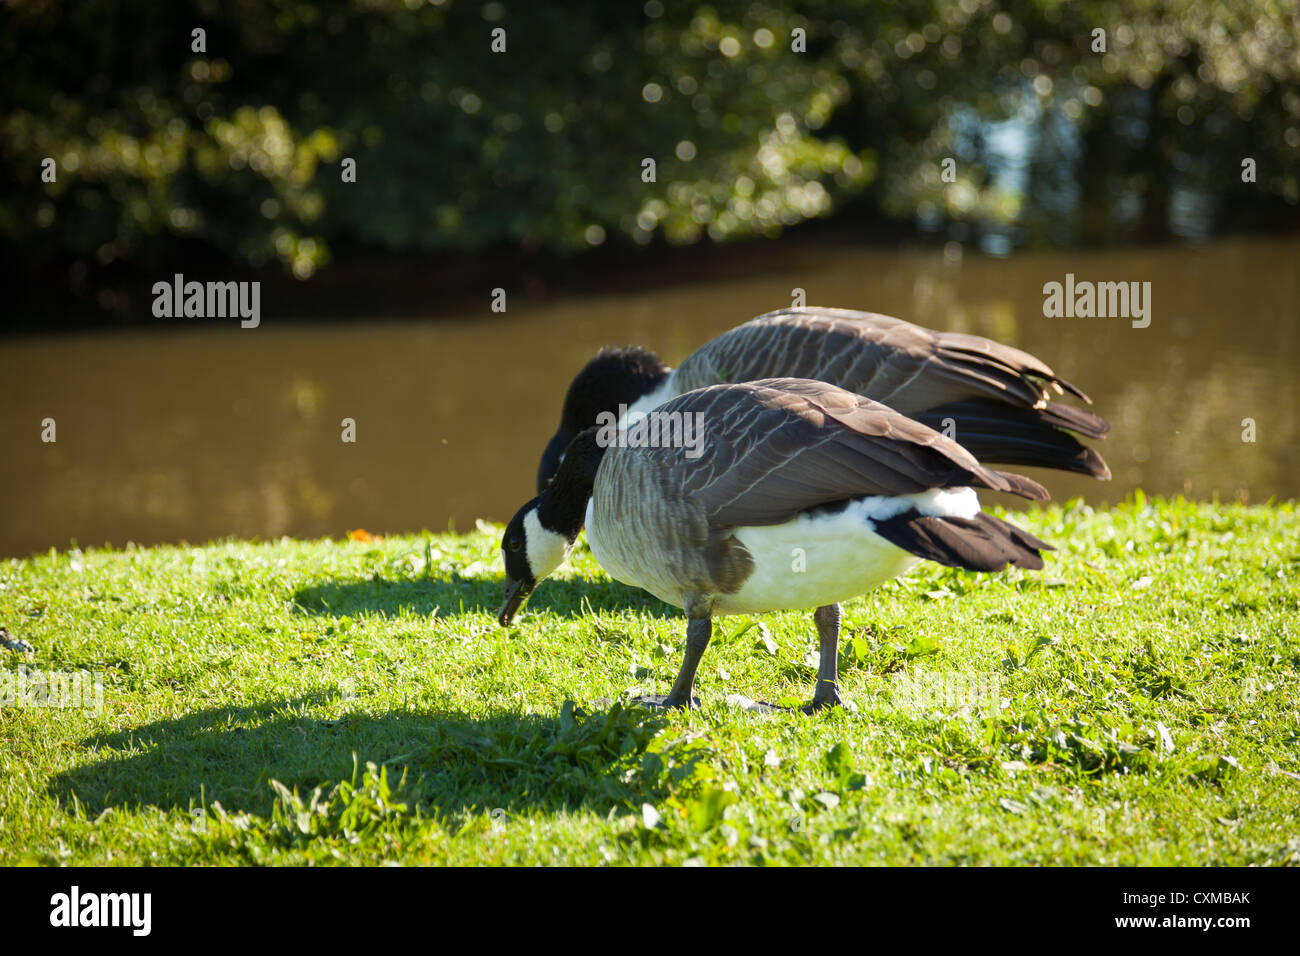 The Canada Goose (Branta canadensis) is a wild goose with a black head and neck, white patches on the face, and a brownish-gray Stock Photo